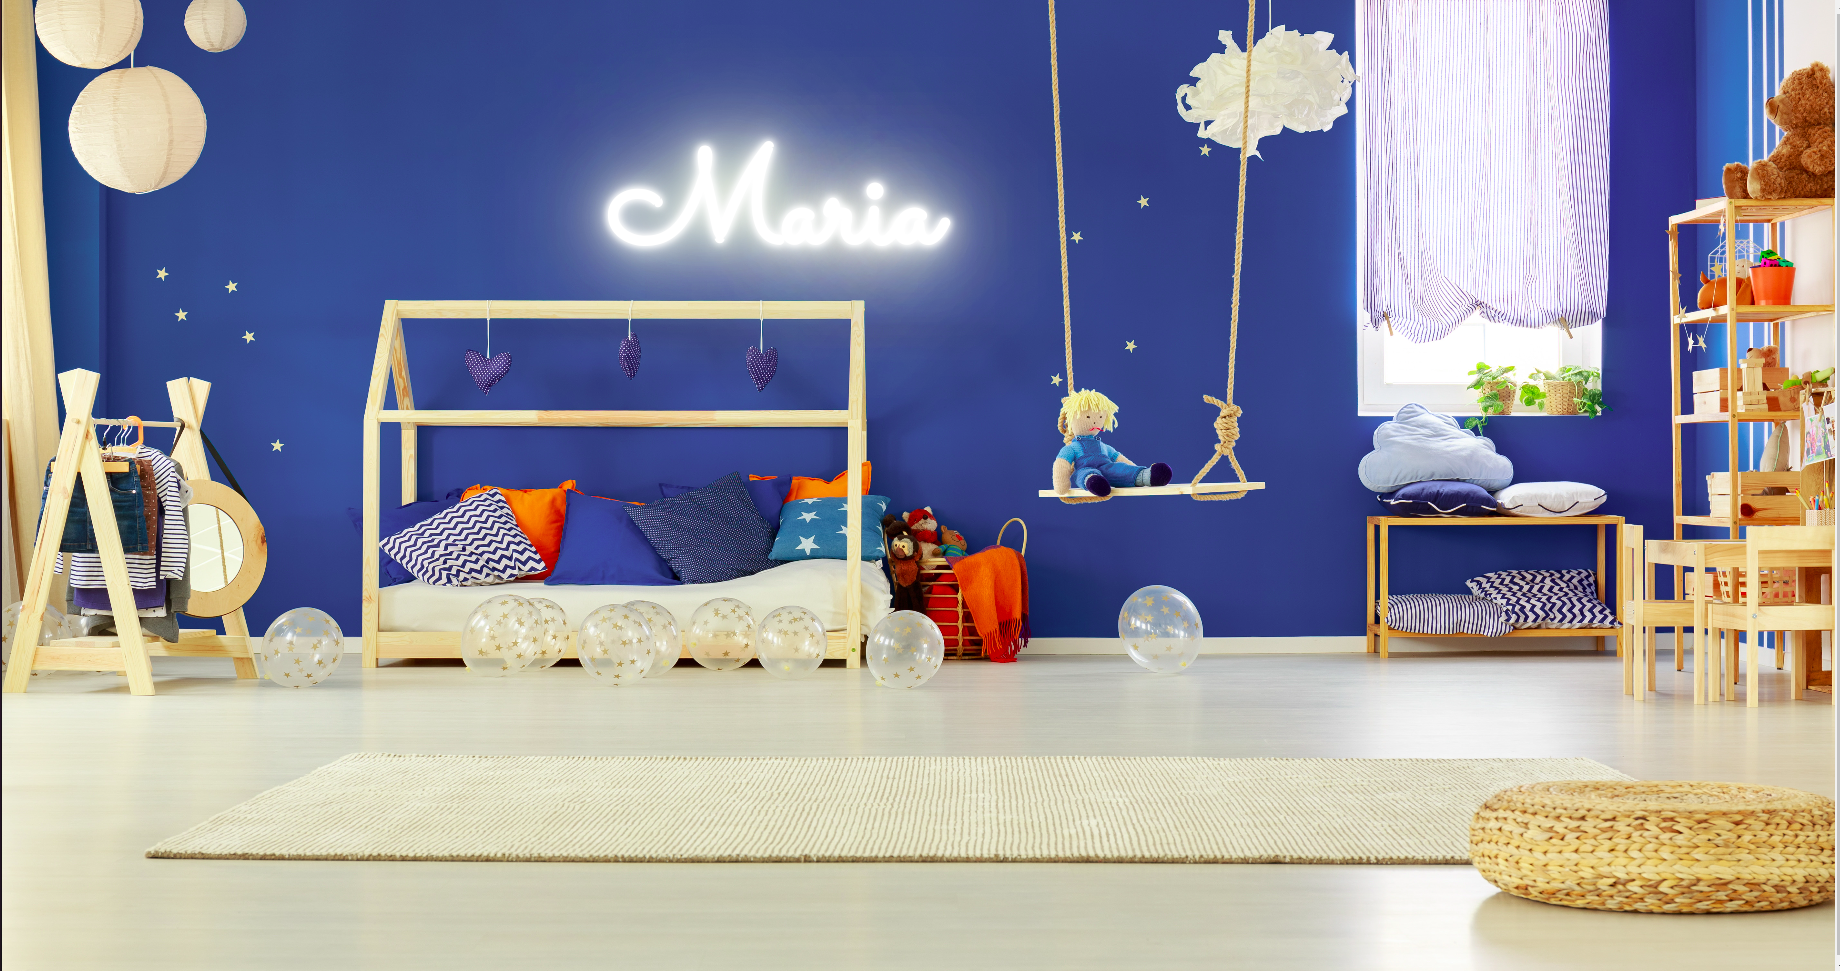 "Maria" Baby Name LED Neon Sign